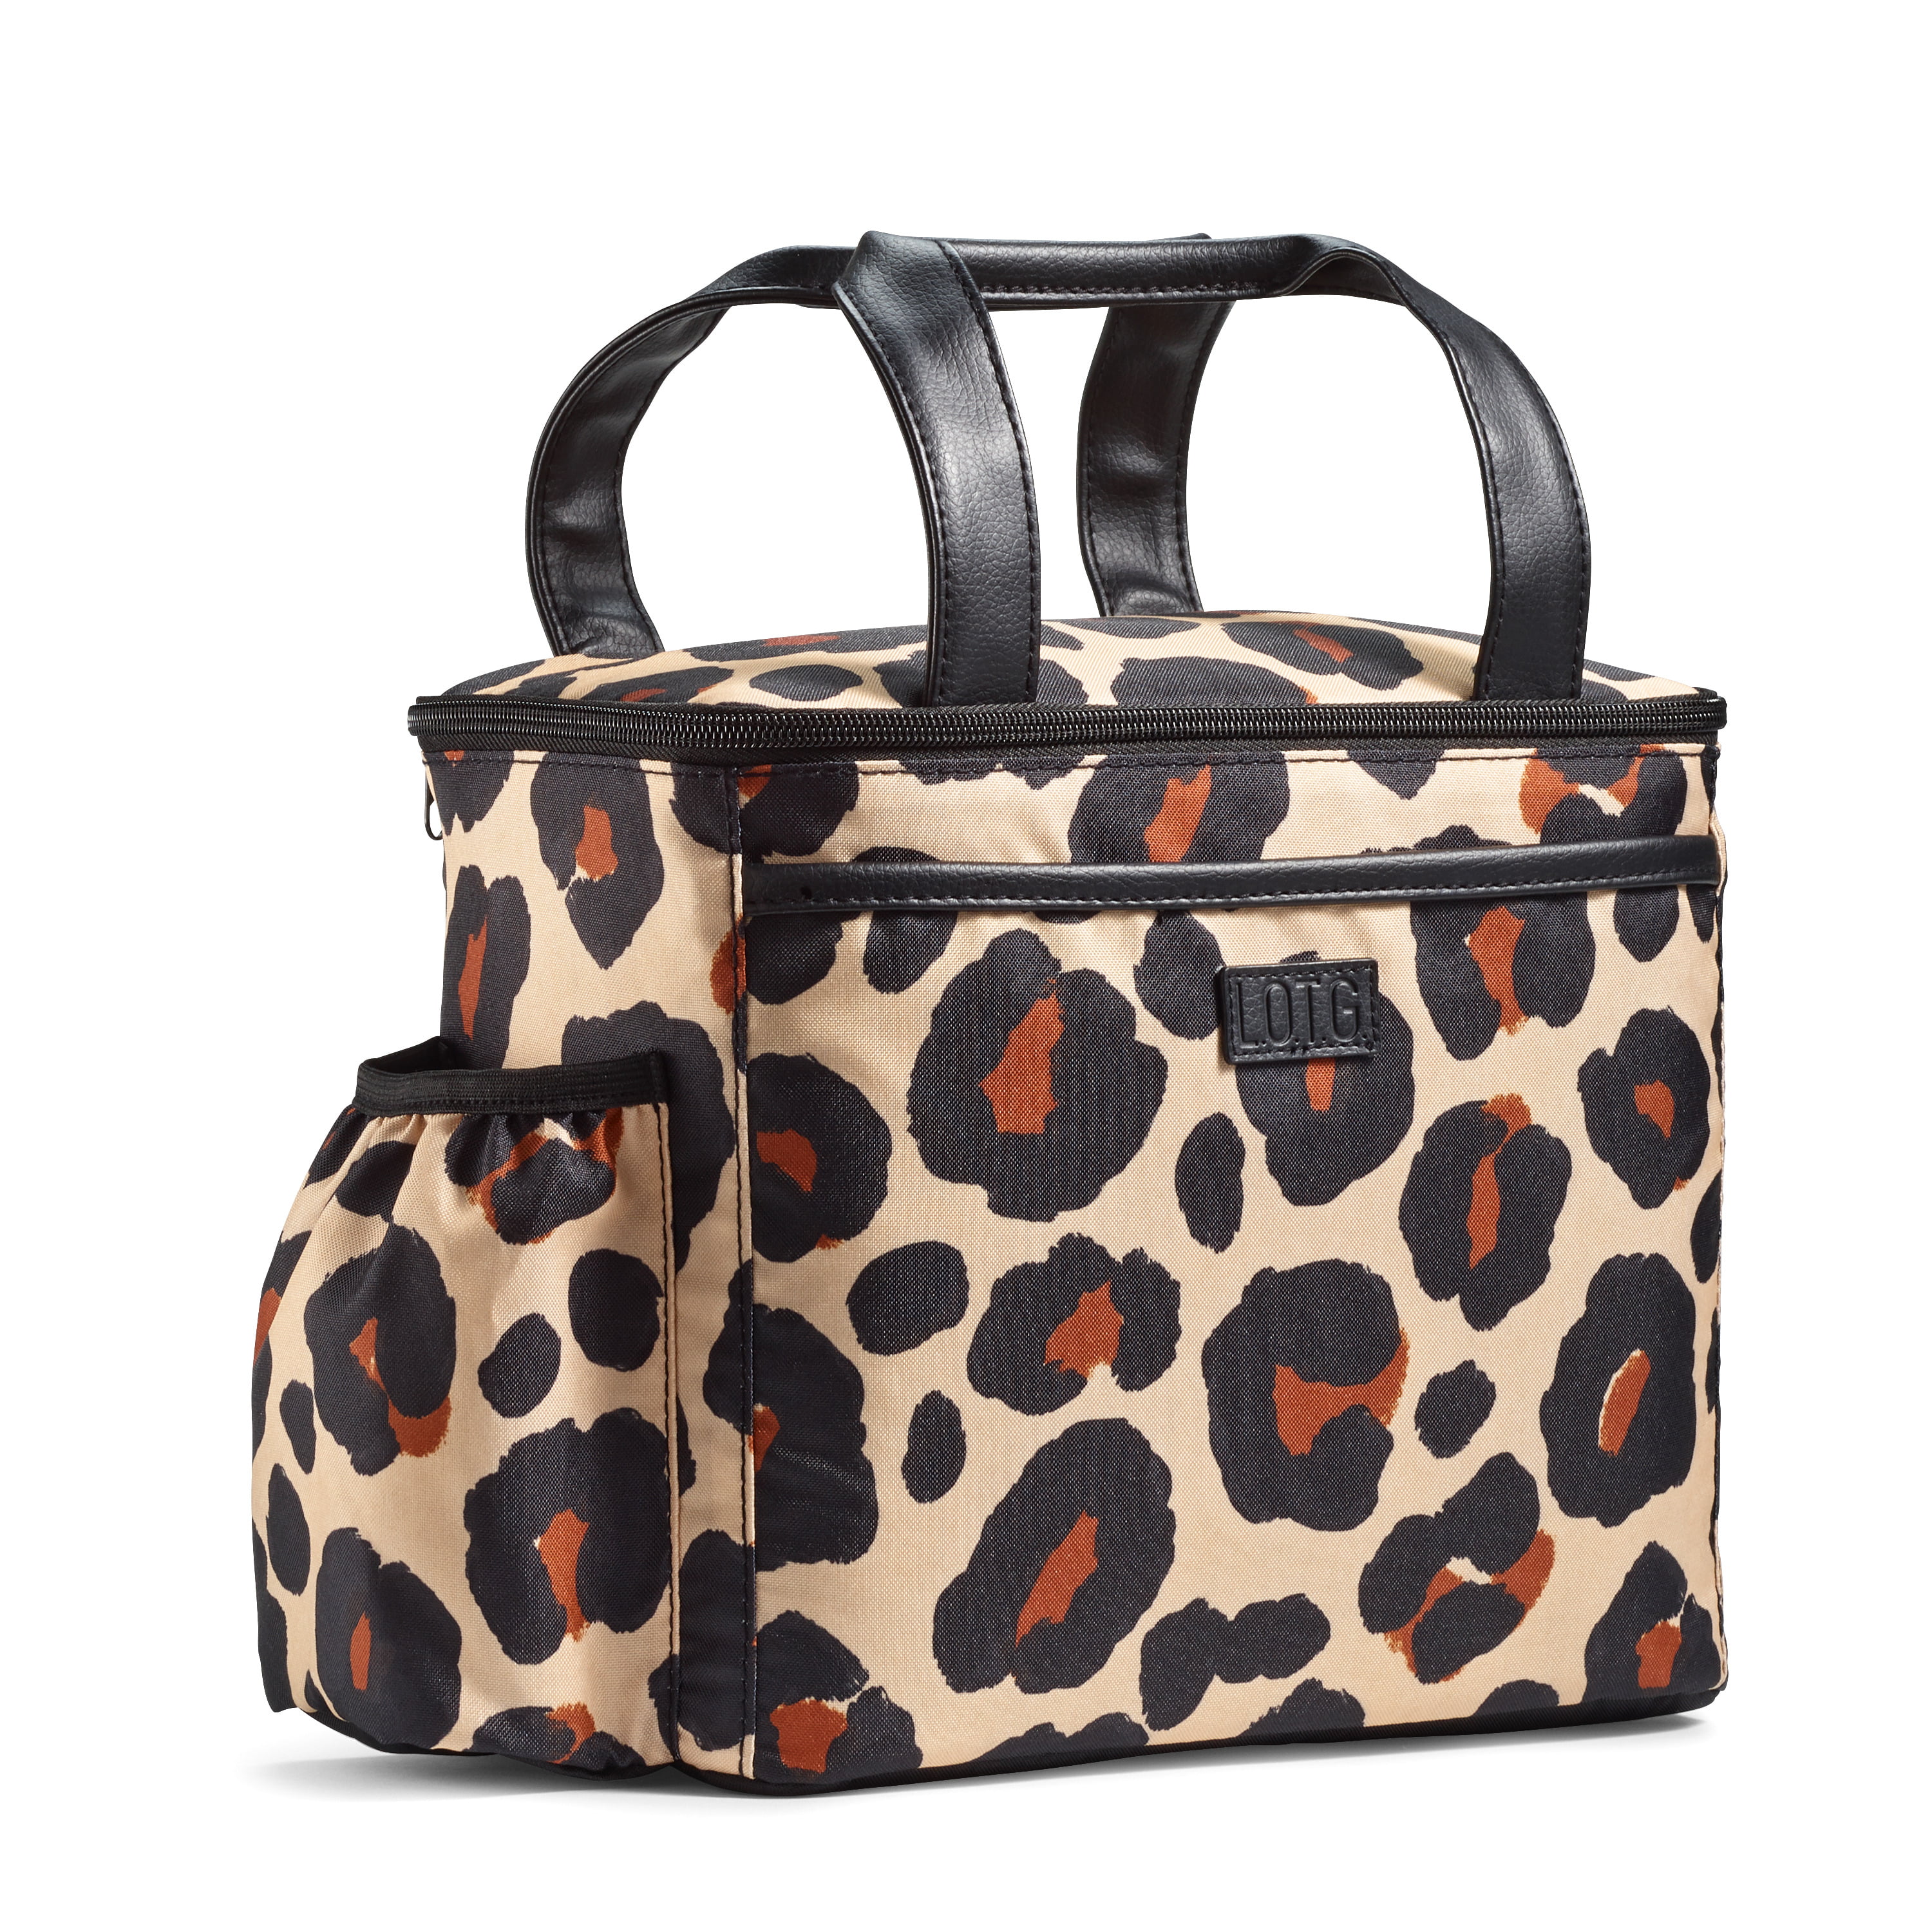 New Womens Large Size Trendy Leopard Print Top Handle Hand Bag With Side Pockets